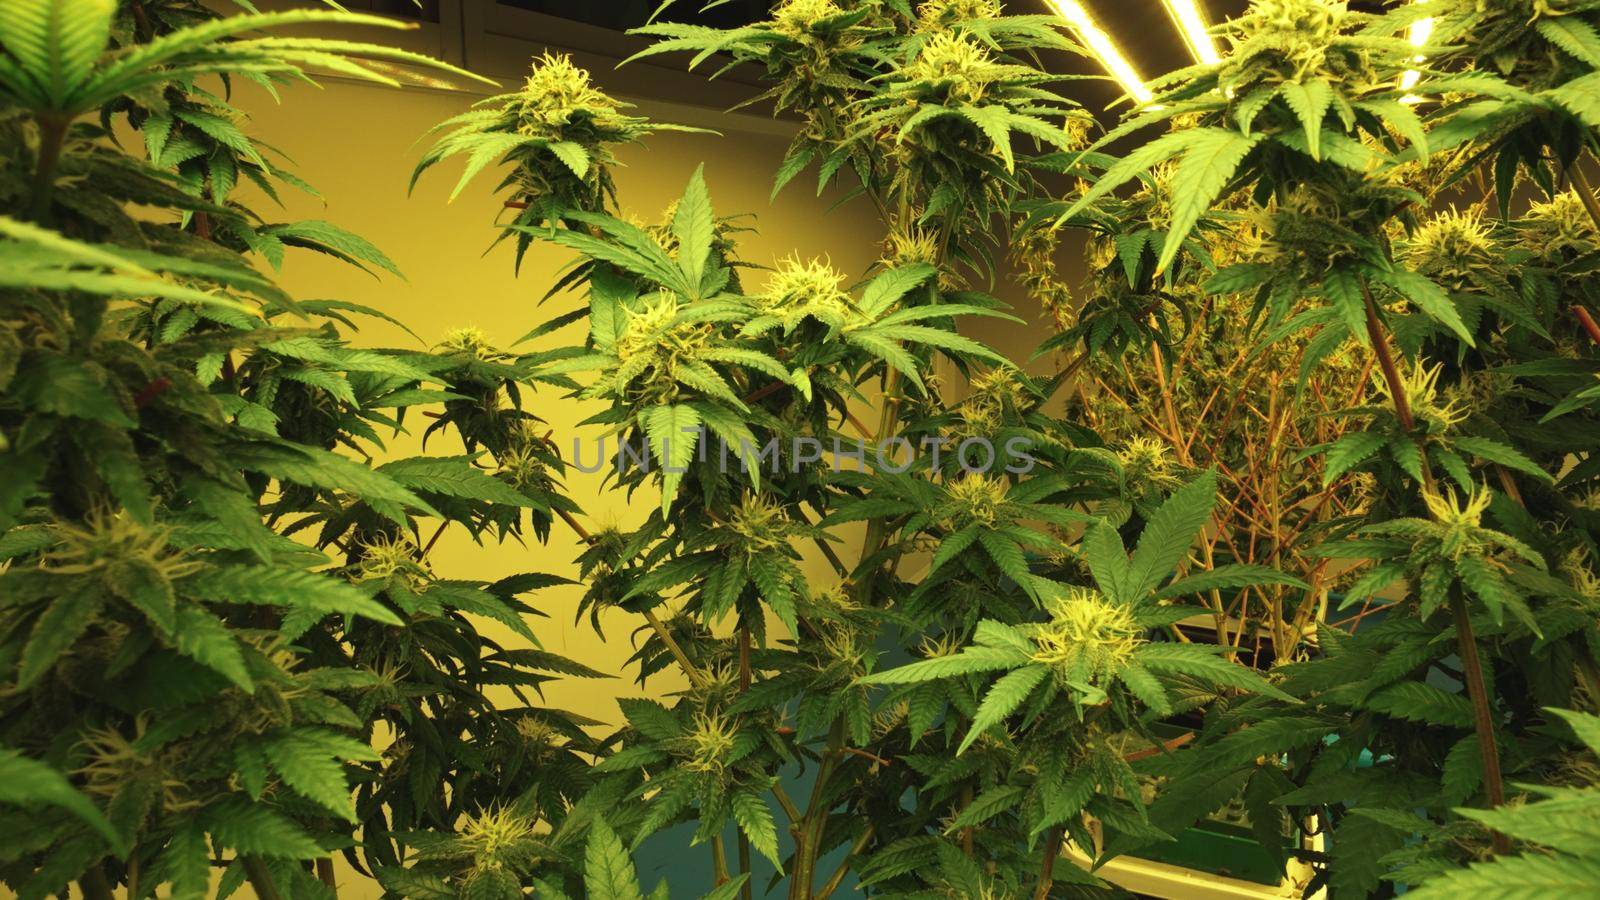 Cannabis plant in curative cannabis weed farm for medical cannabis product . The indoor agriculture farm provide high quality medicinal cannabis production for health care and medicine uses .